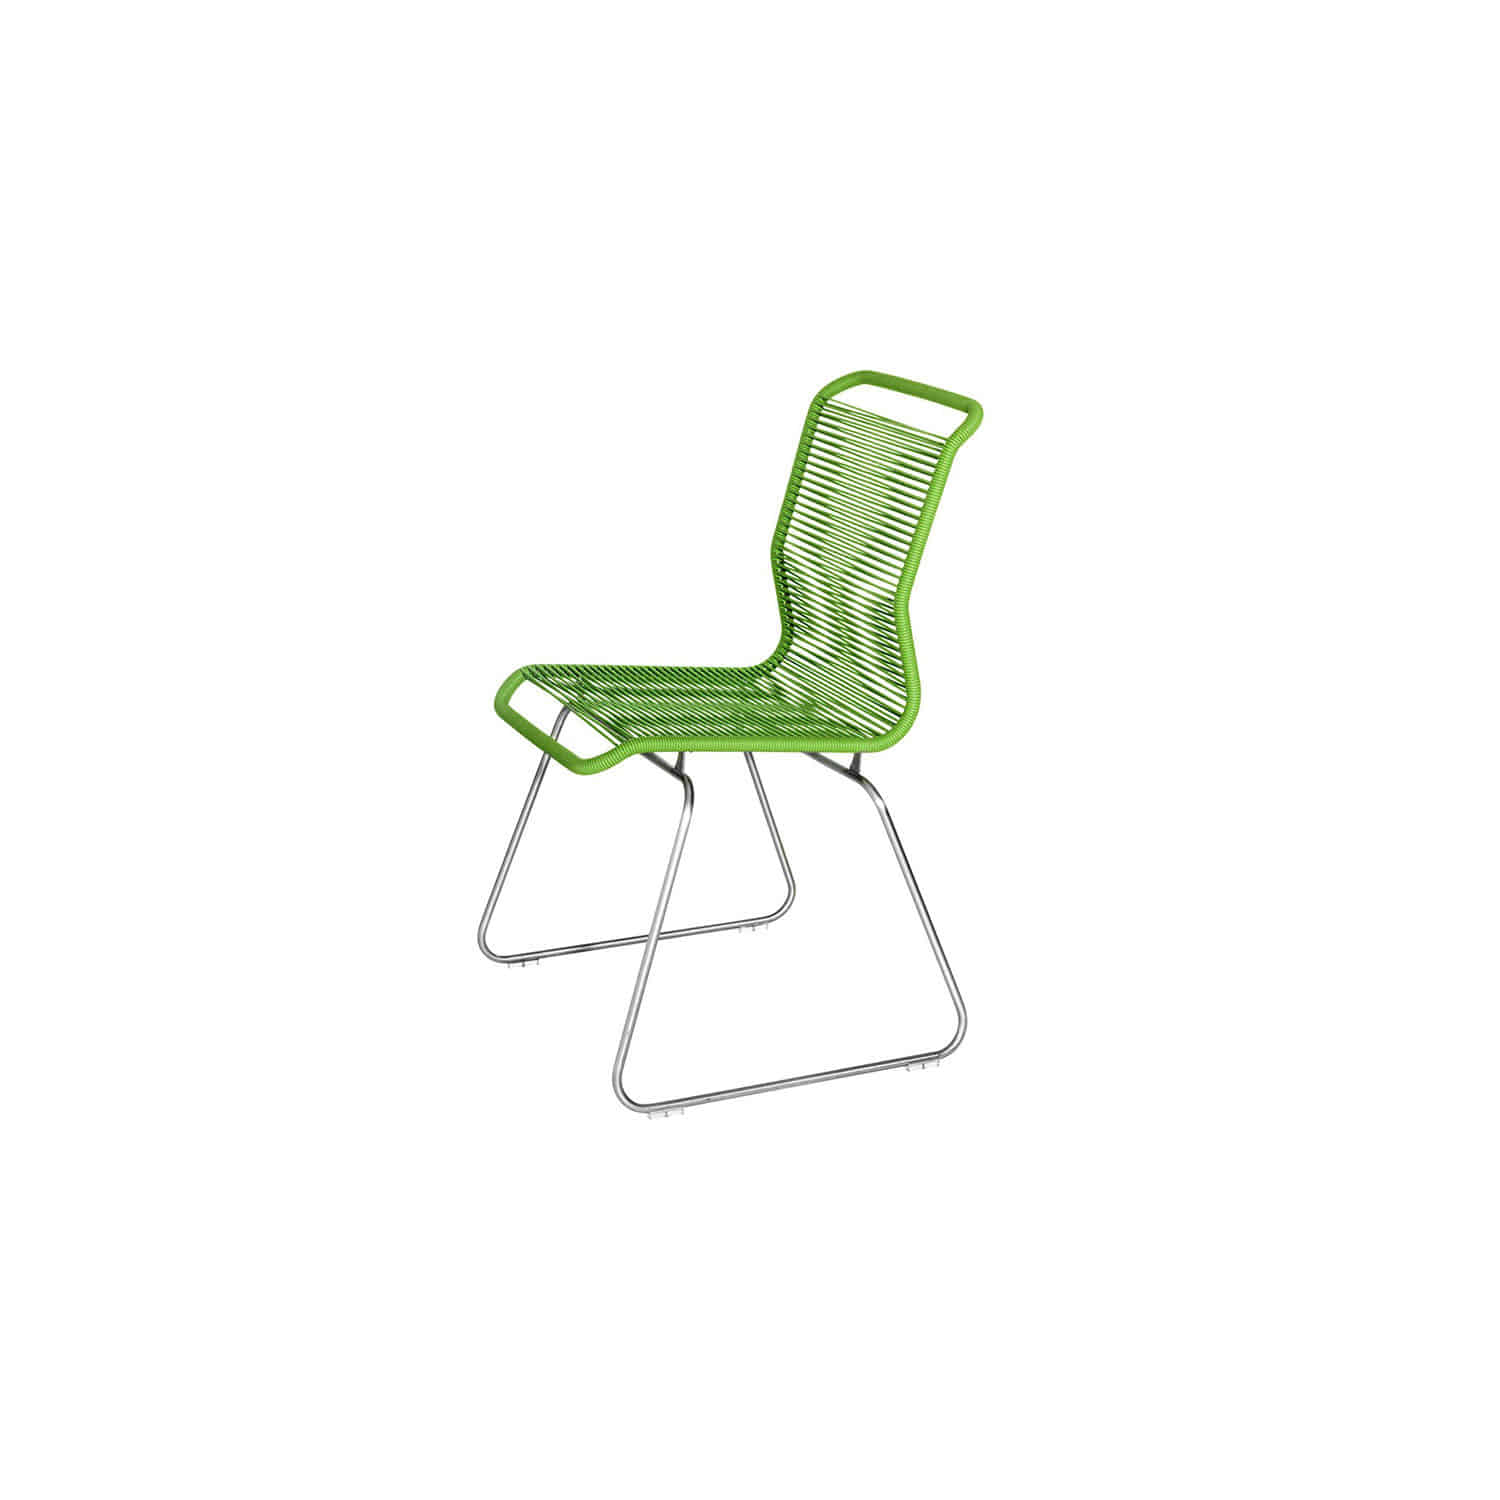 Limited edition * Panton one kids, Green